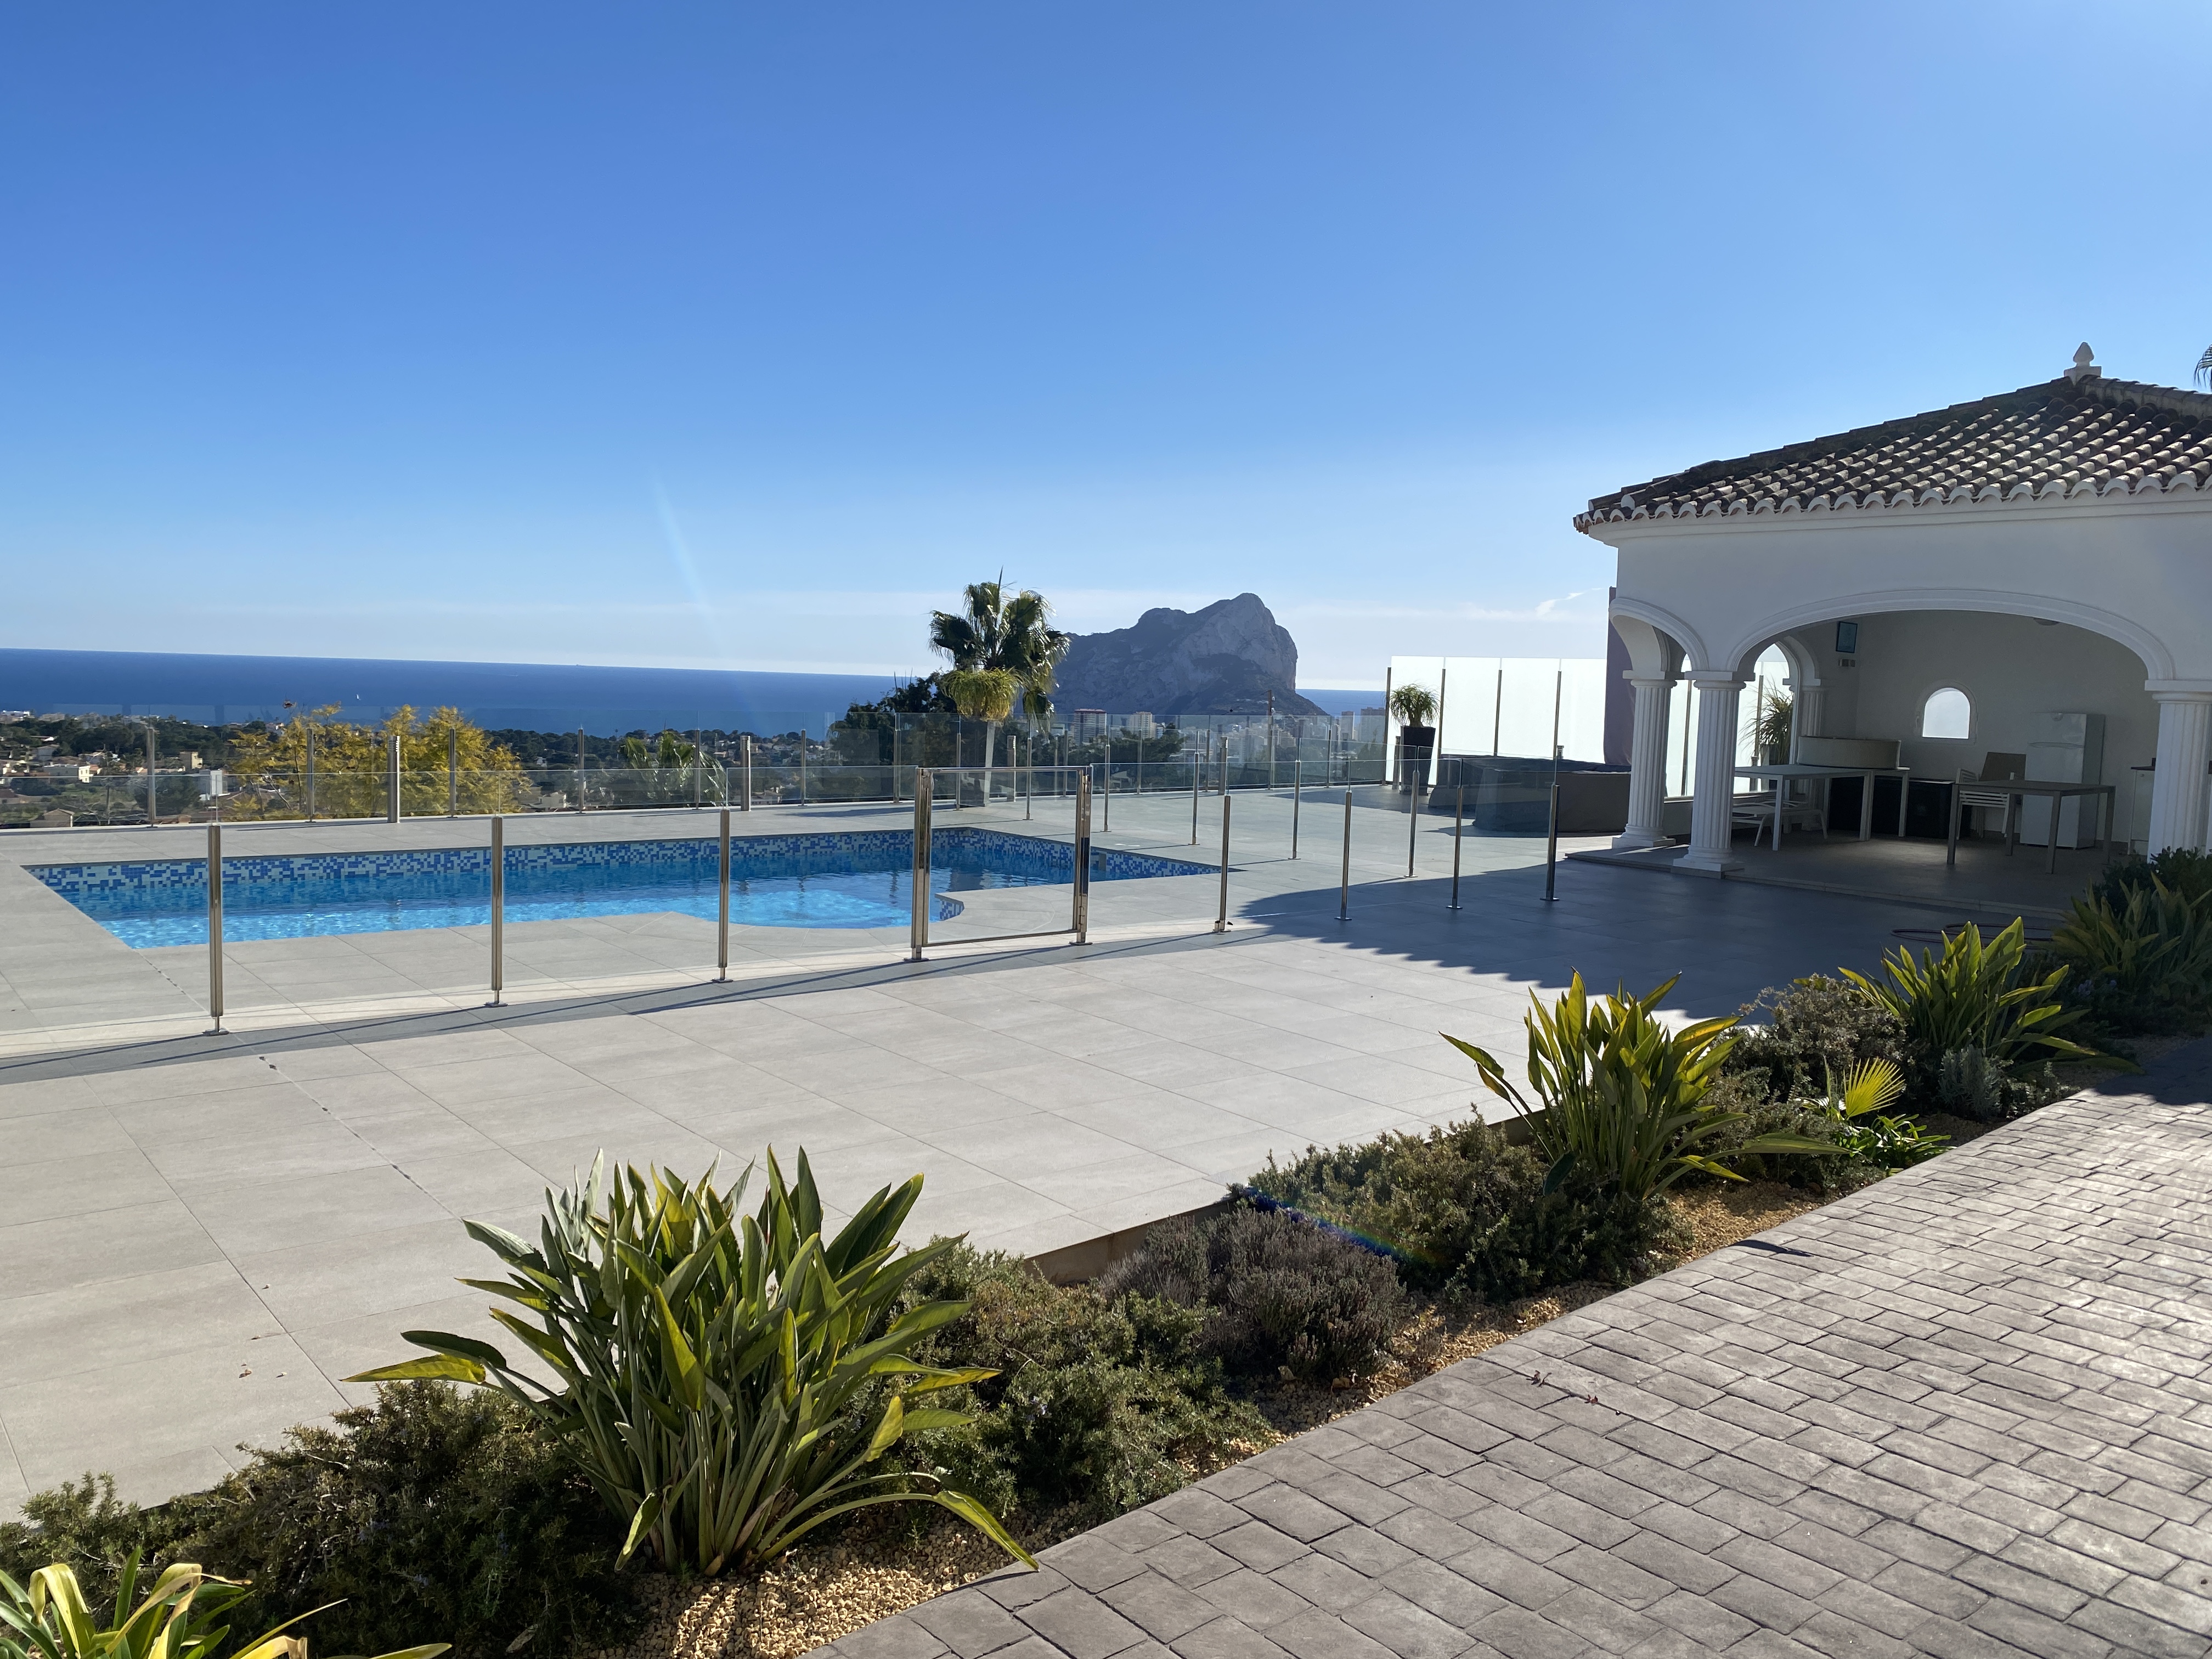 Villa for sale with panoramic sea views between Moraira and Calpe